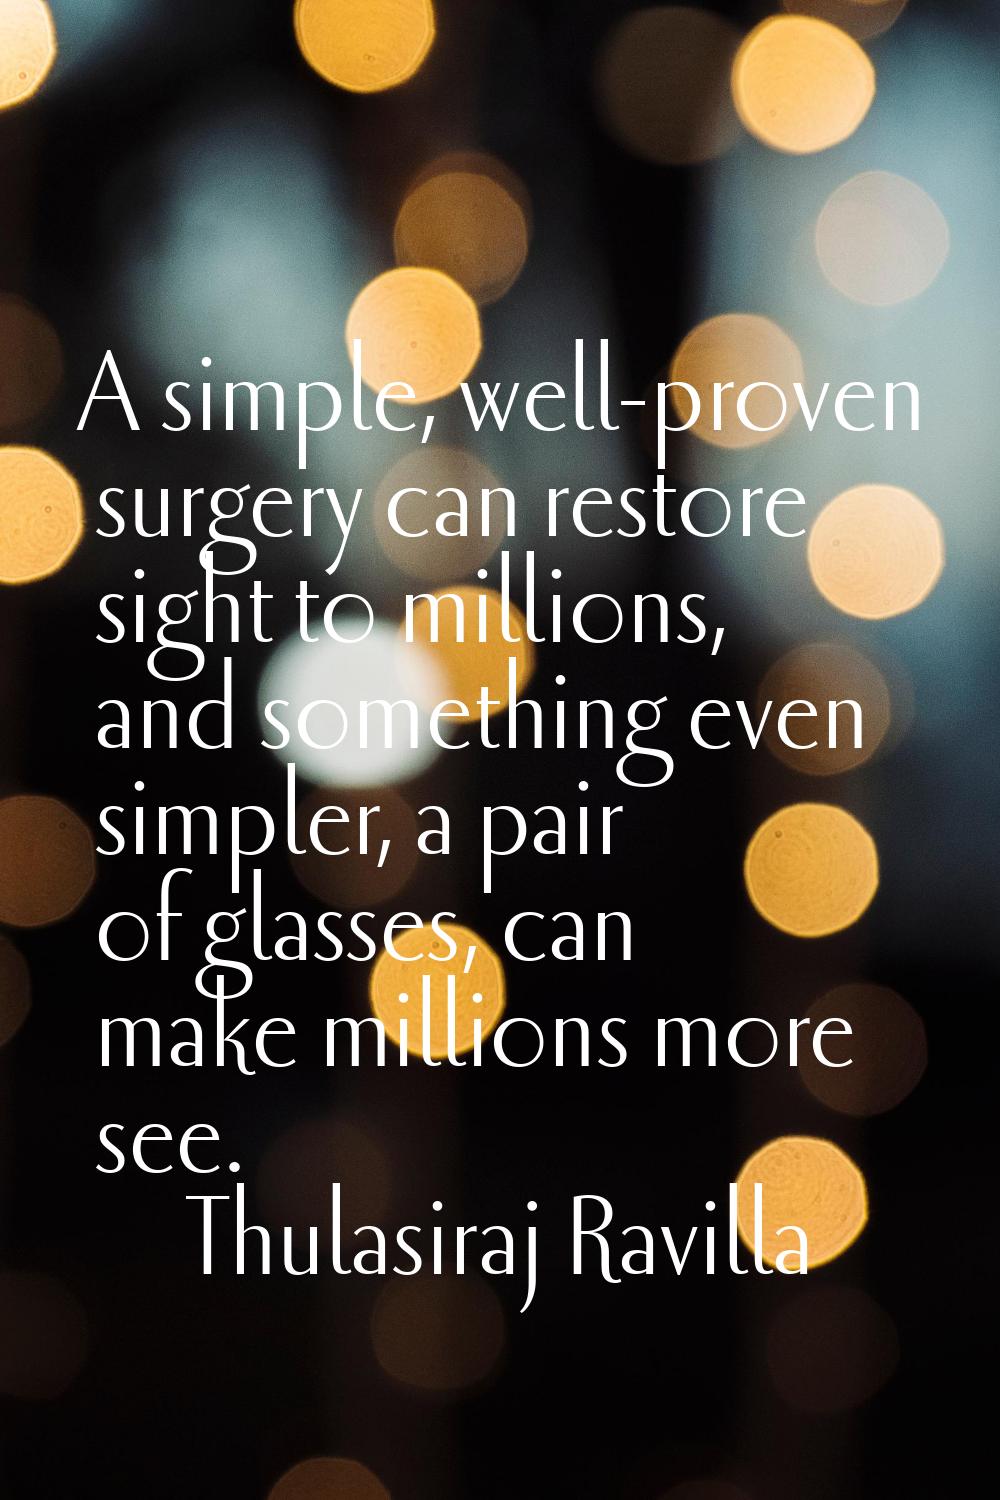 A simple, well-proven surgery can restore sight to millions, and something even simpler, a pair of 